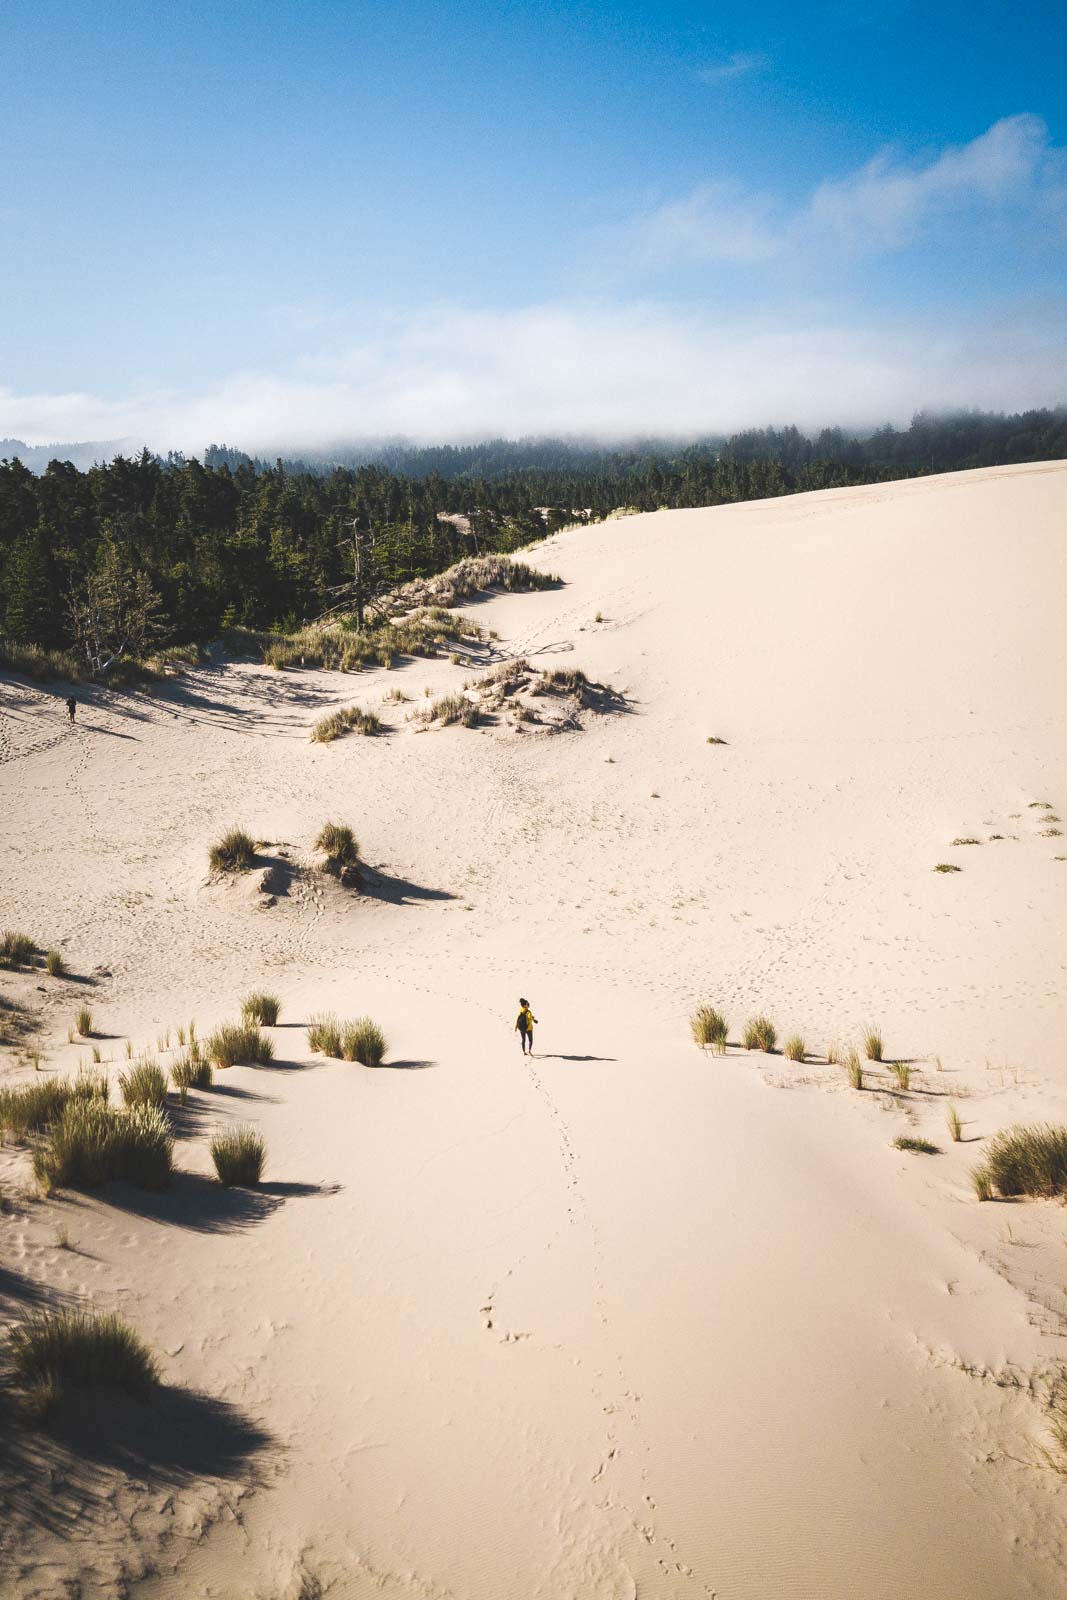 The John Dellenback Trail is a challenging and fun trail in the Oregon sand dunes.